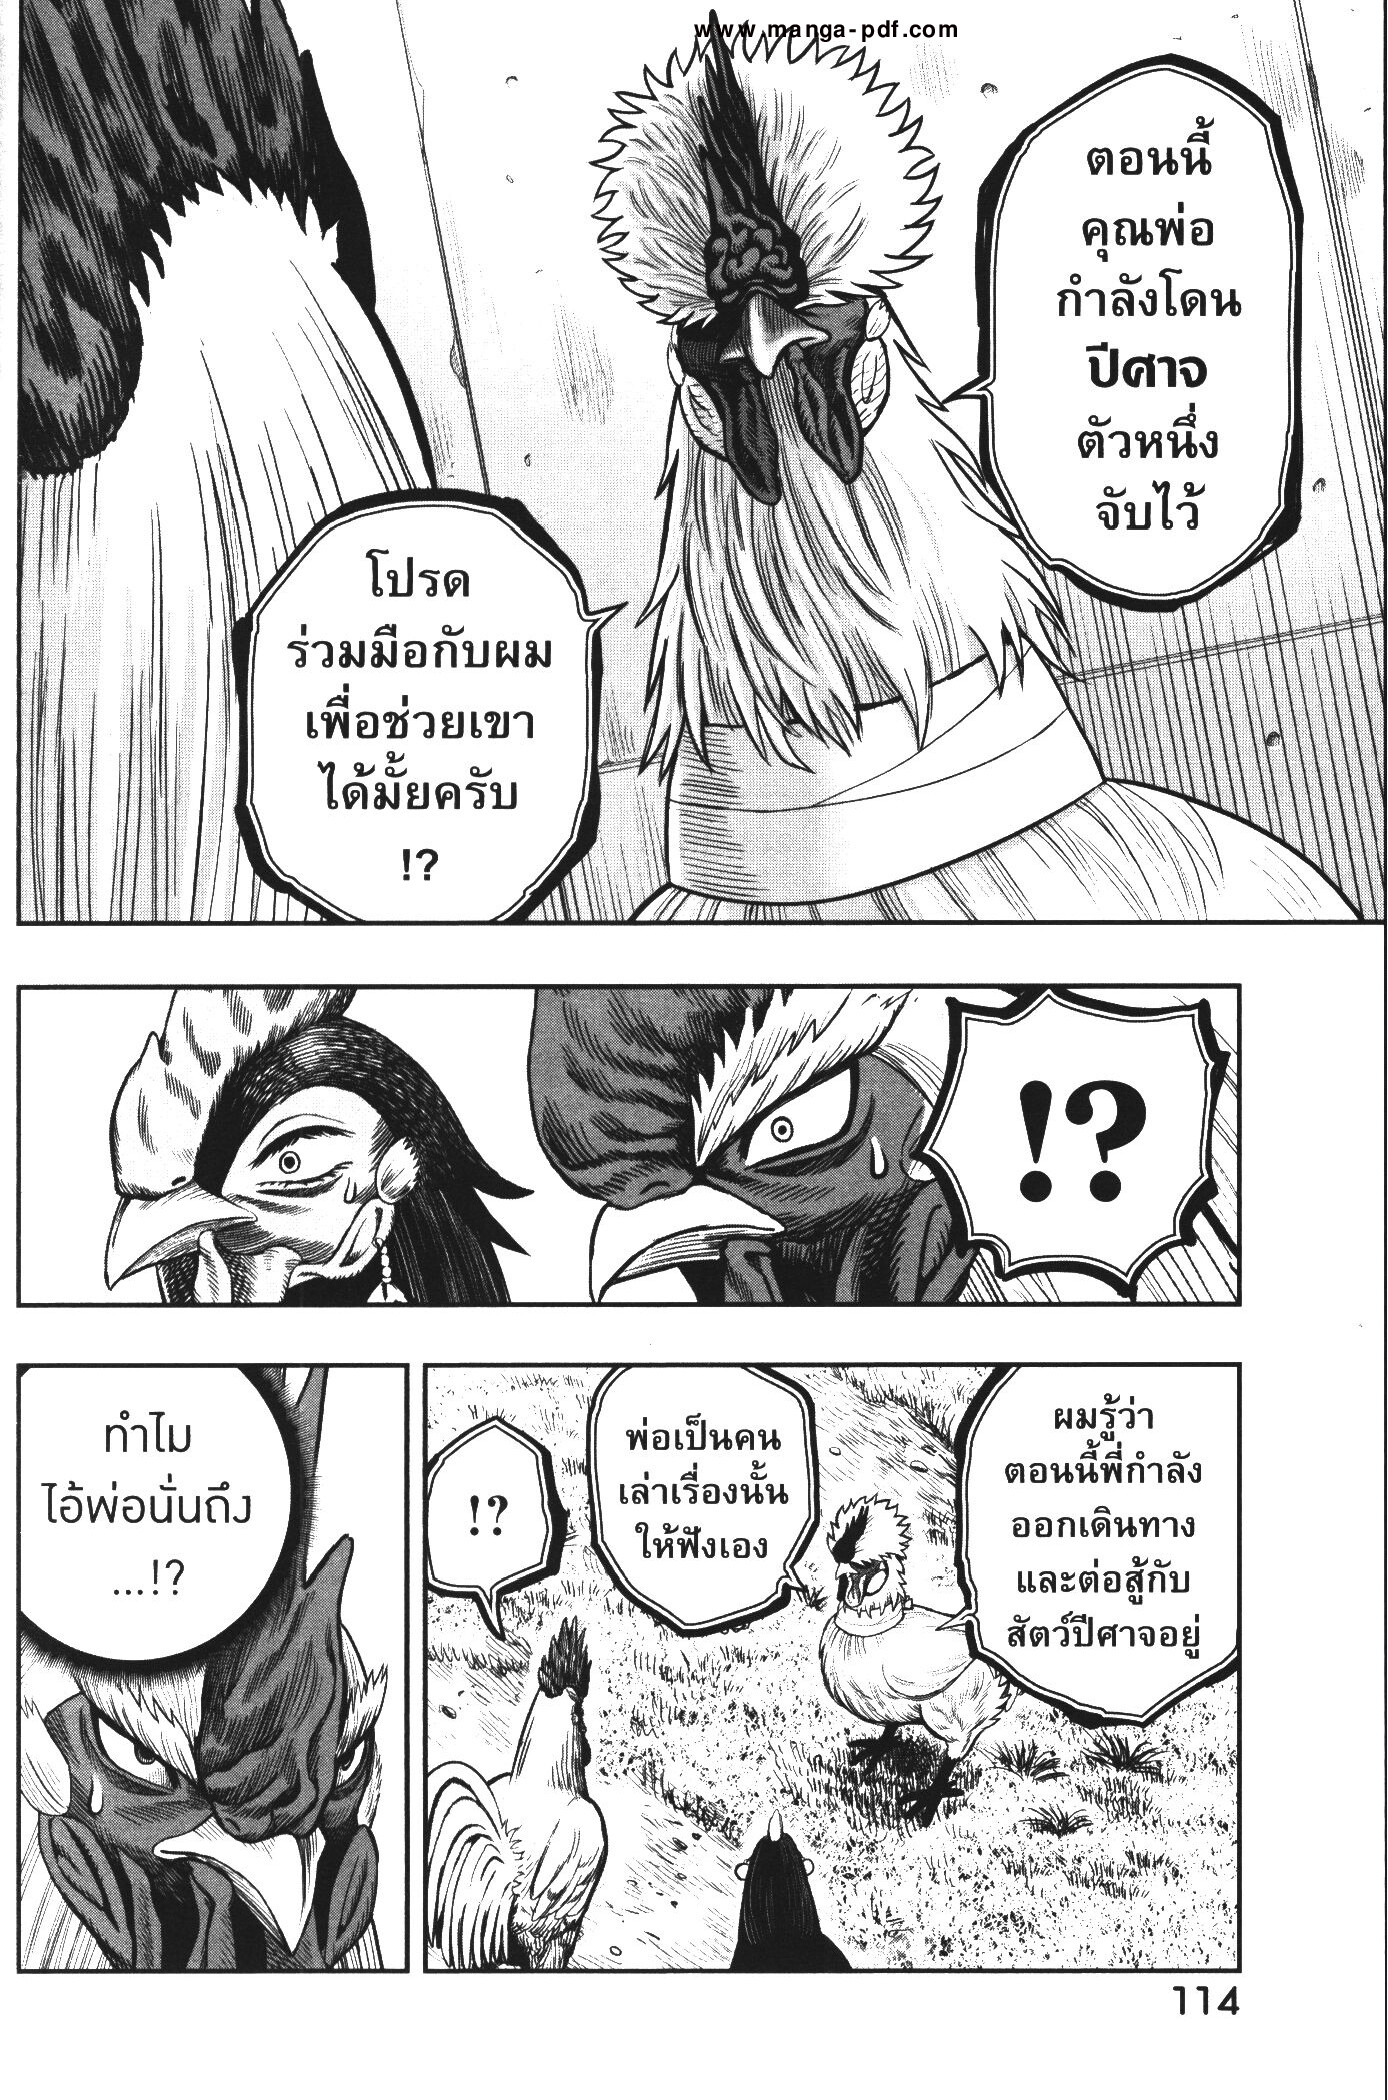 Rooster Fighter 19 (16)